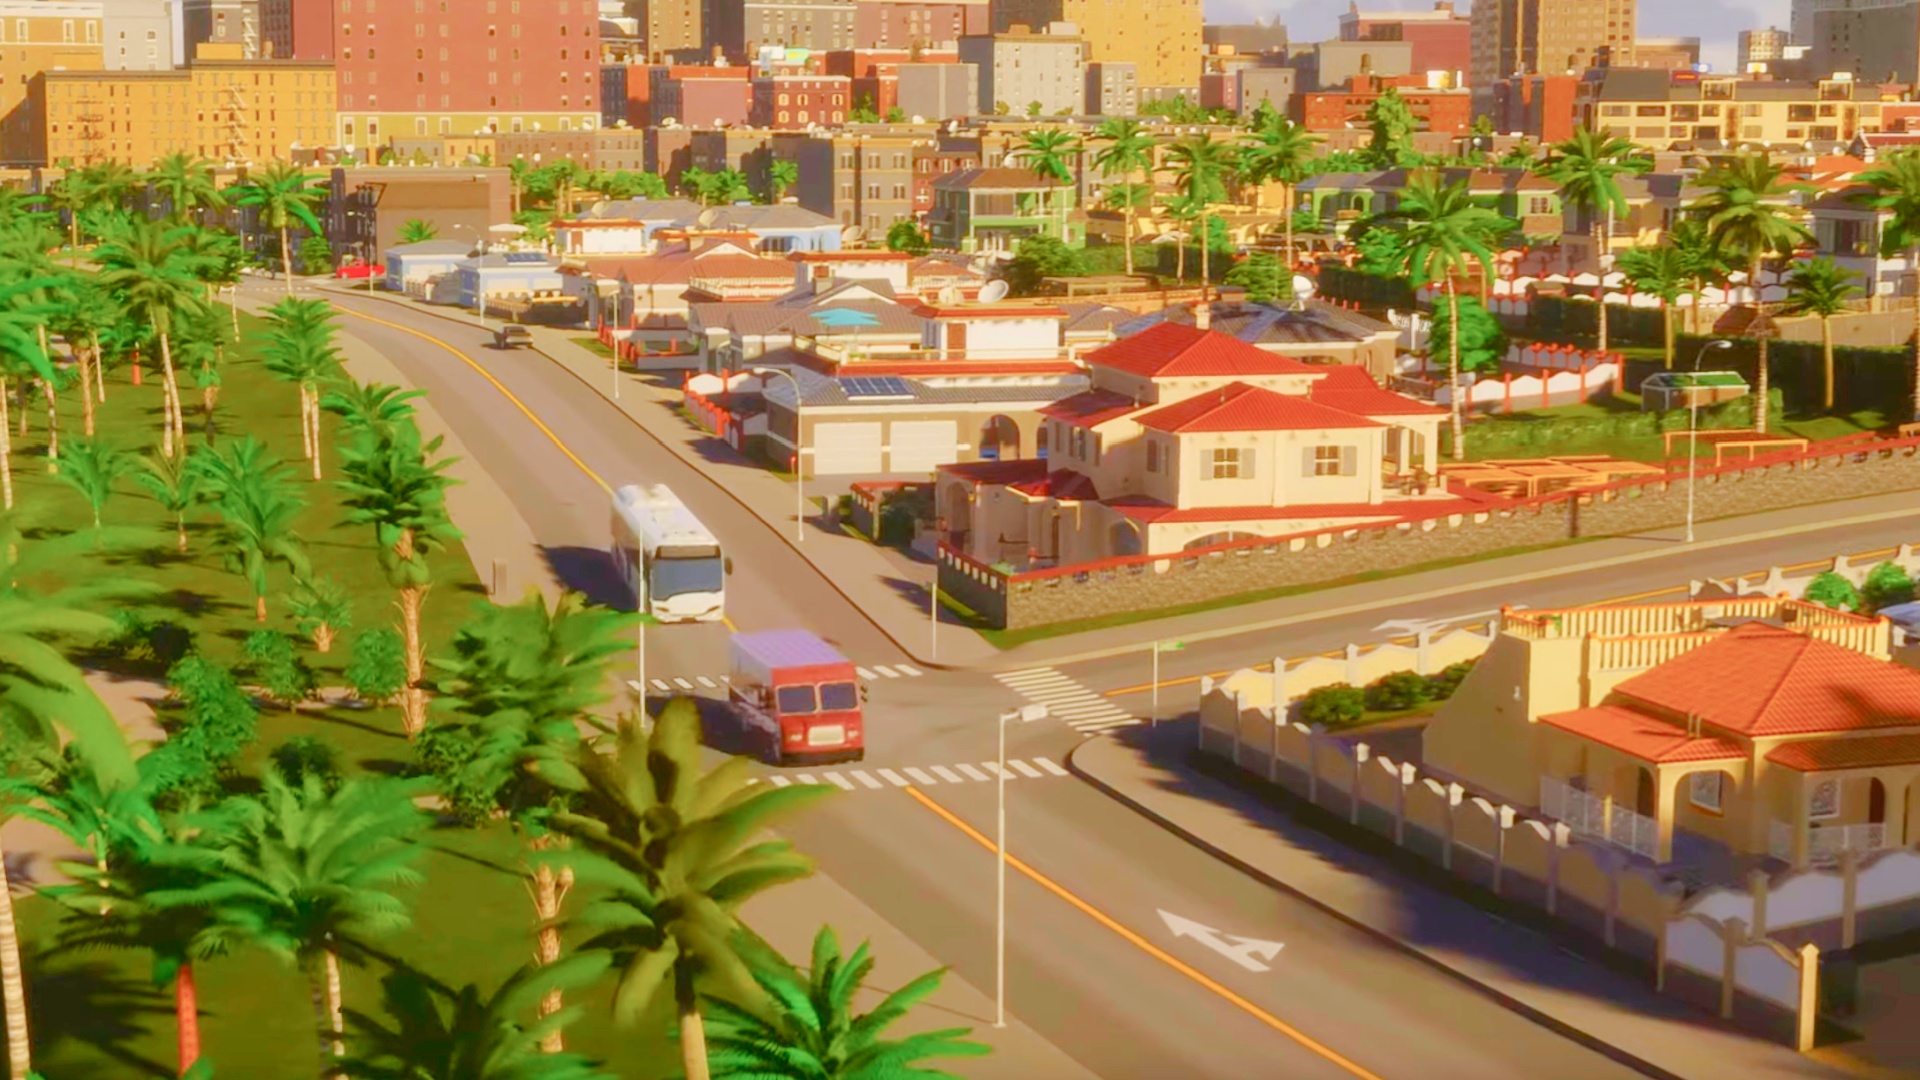 Cities Skylines 2 finally gets official mod support, new asset pack